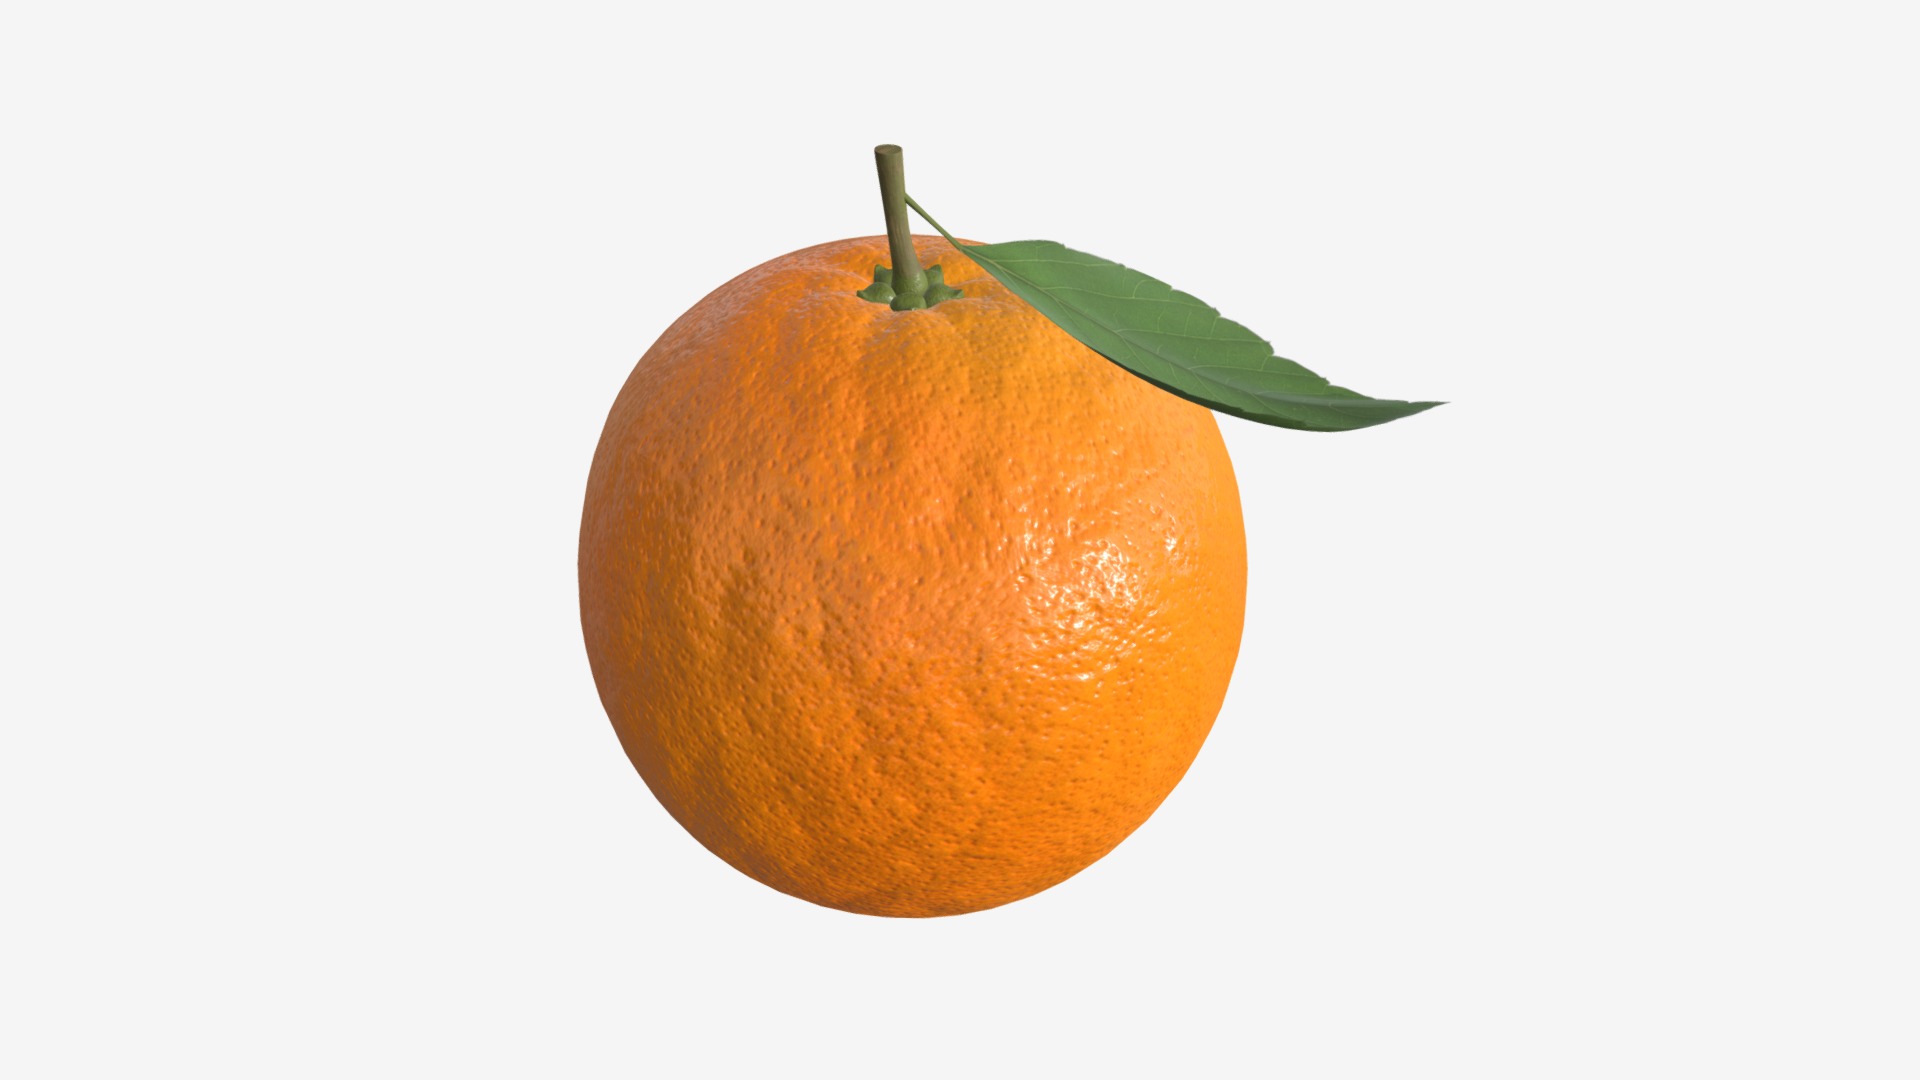 3D model Orange with leaf - This is a 3D model of the Orange with leaf. The 3D model is about an orange with a green leaf.